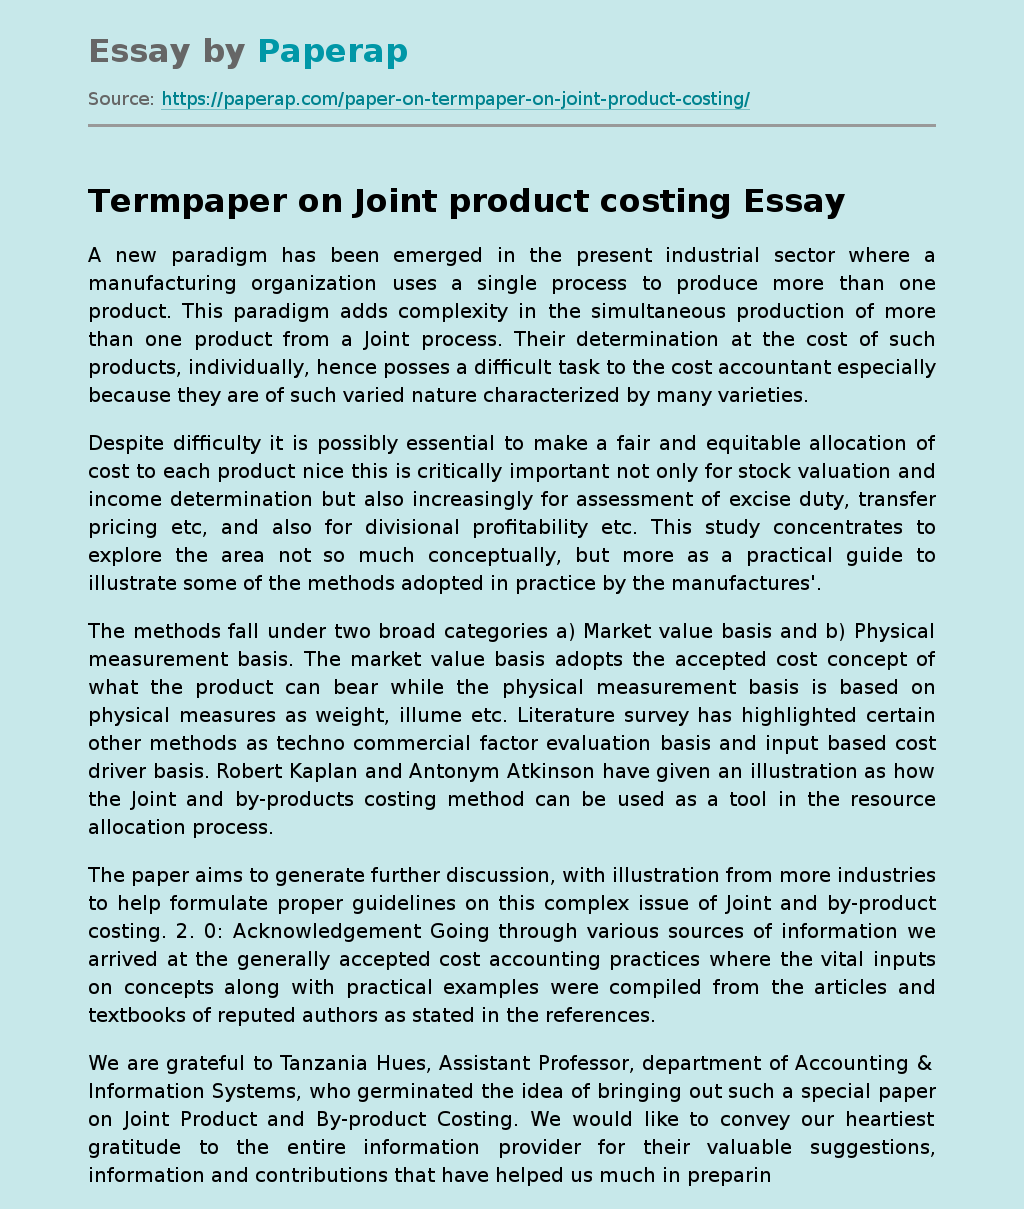 Termpaper on Joint product costing